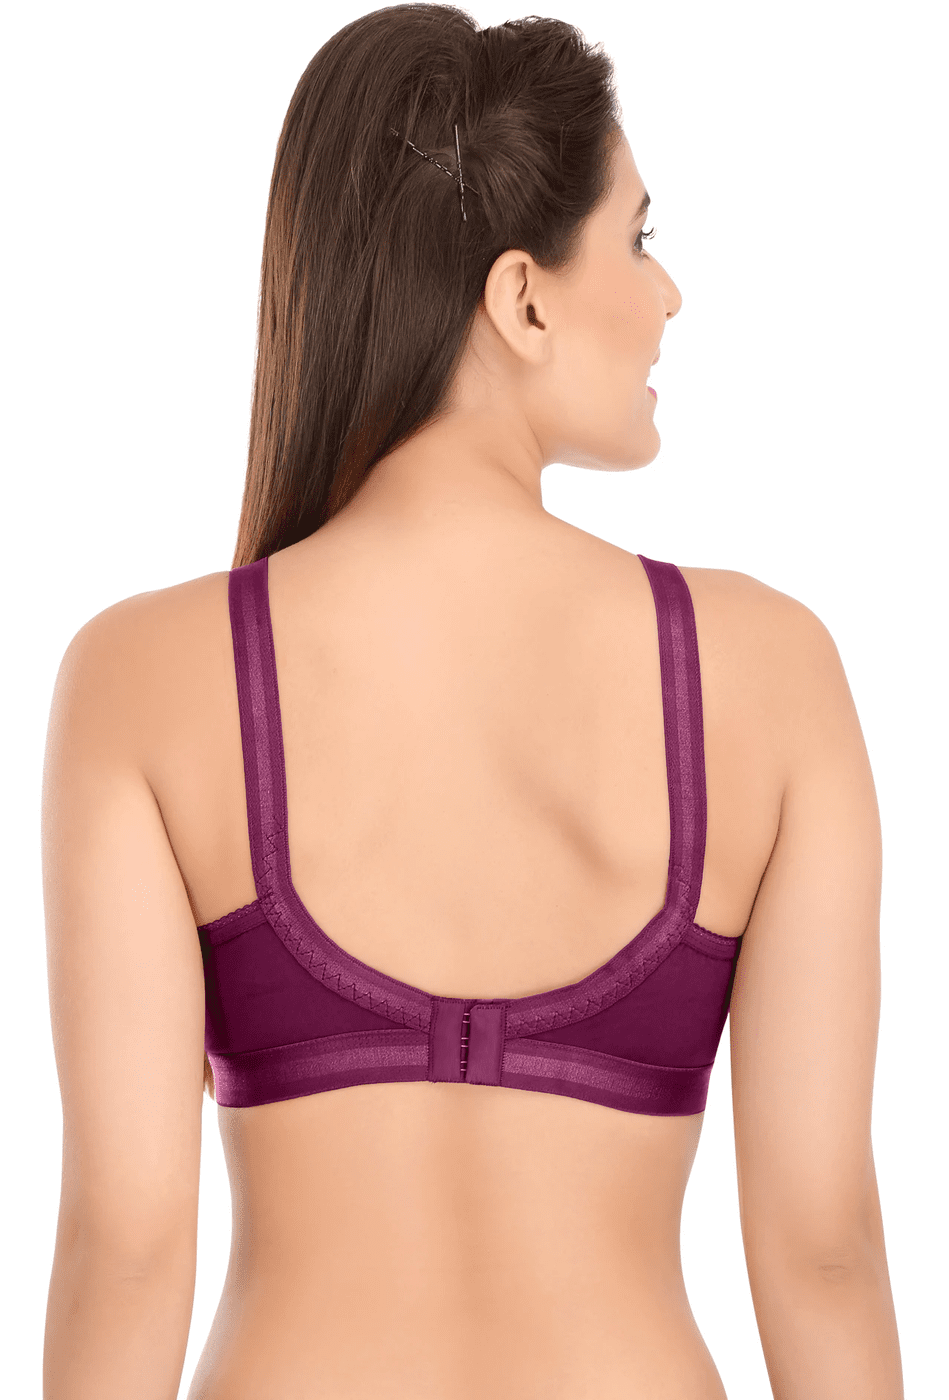 Sona Women Perfecto Full Cup Everyday Plus Size Cotton Bra (Maroon, 32H)